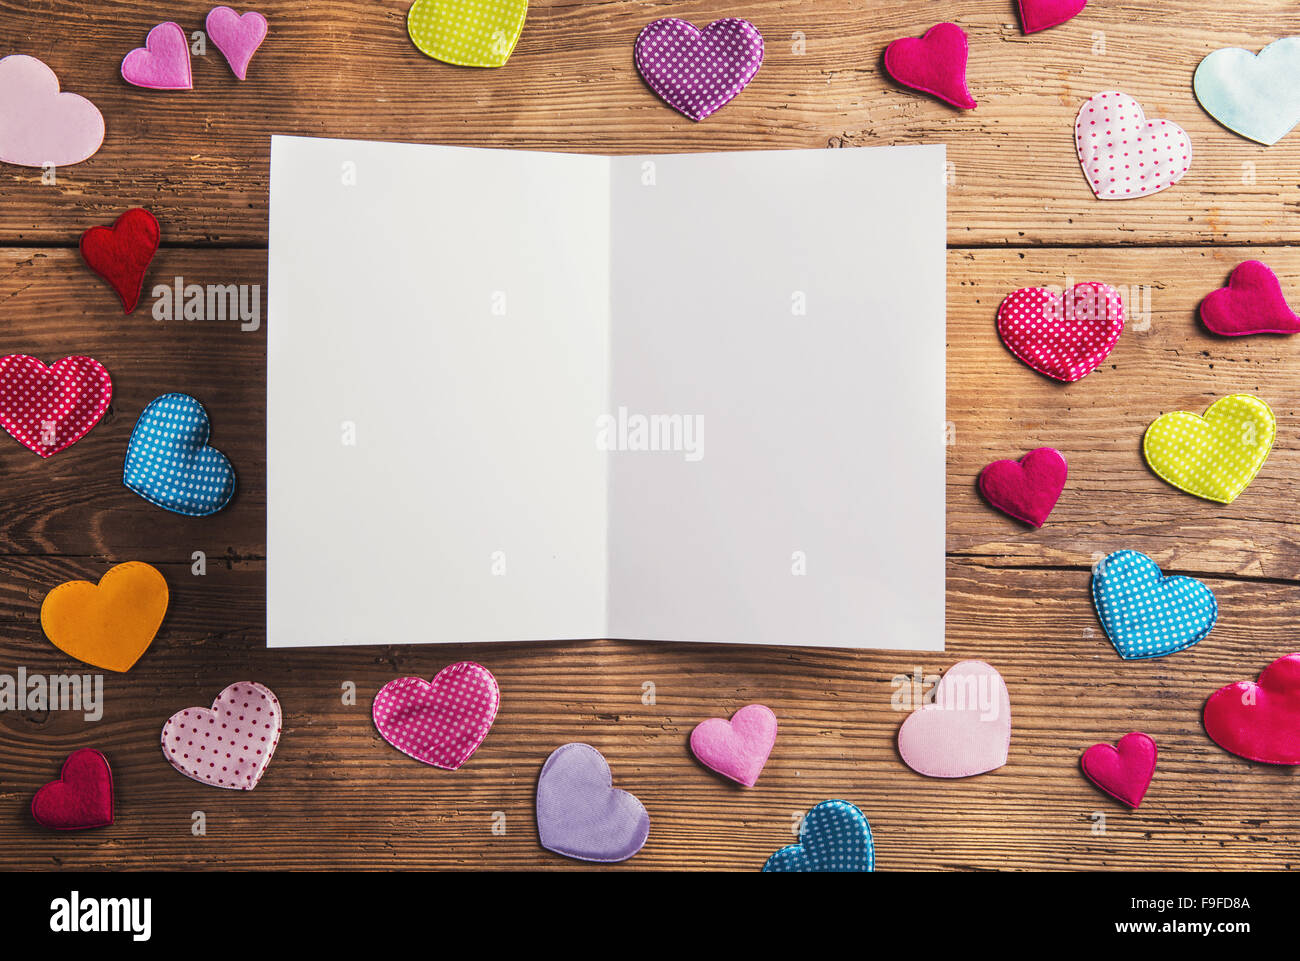 Empty paper sheet and colorful fabric hearts. Studio shot on wooden background. Stock Photo